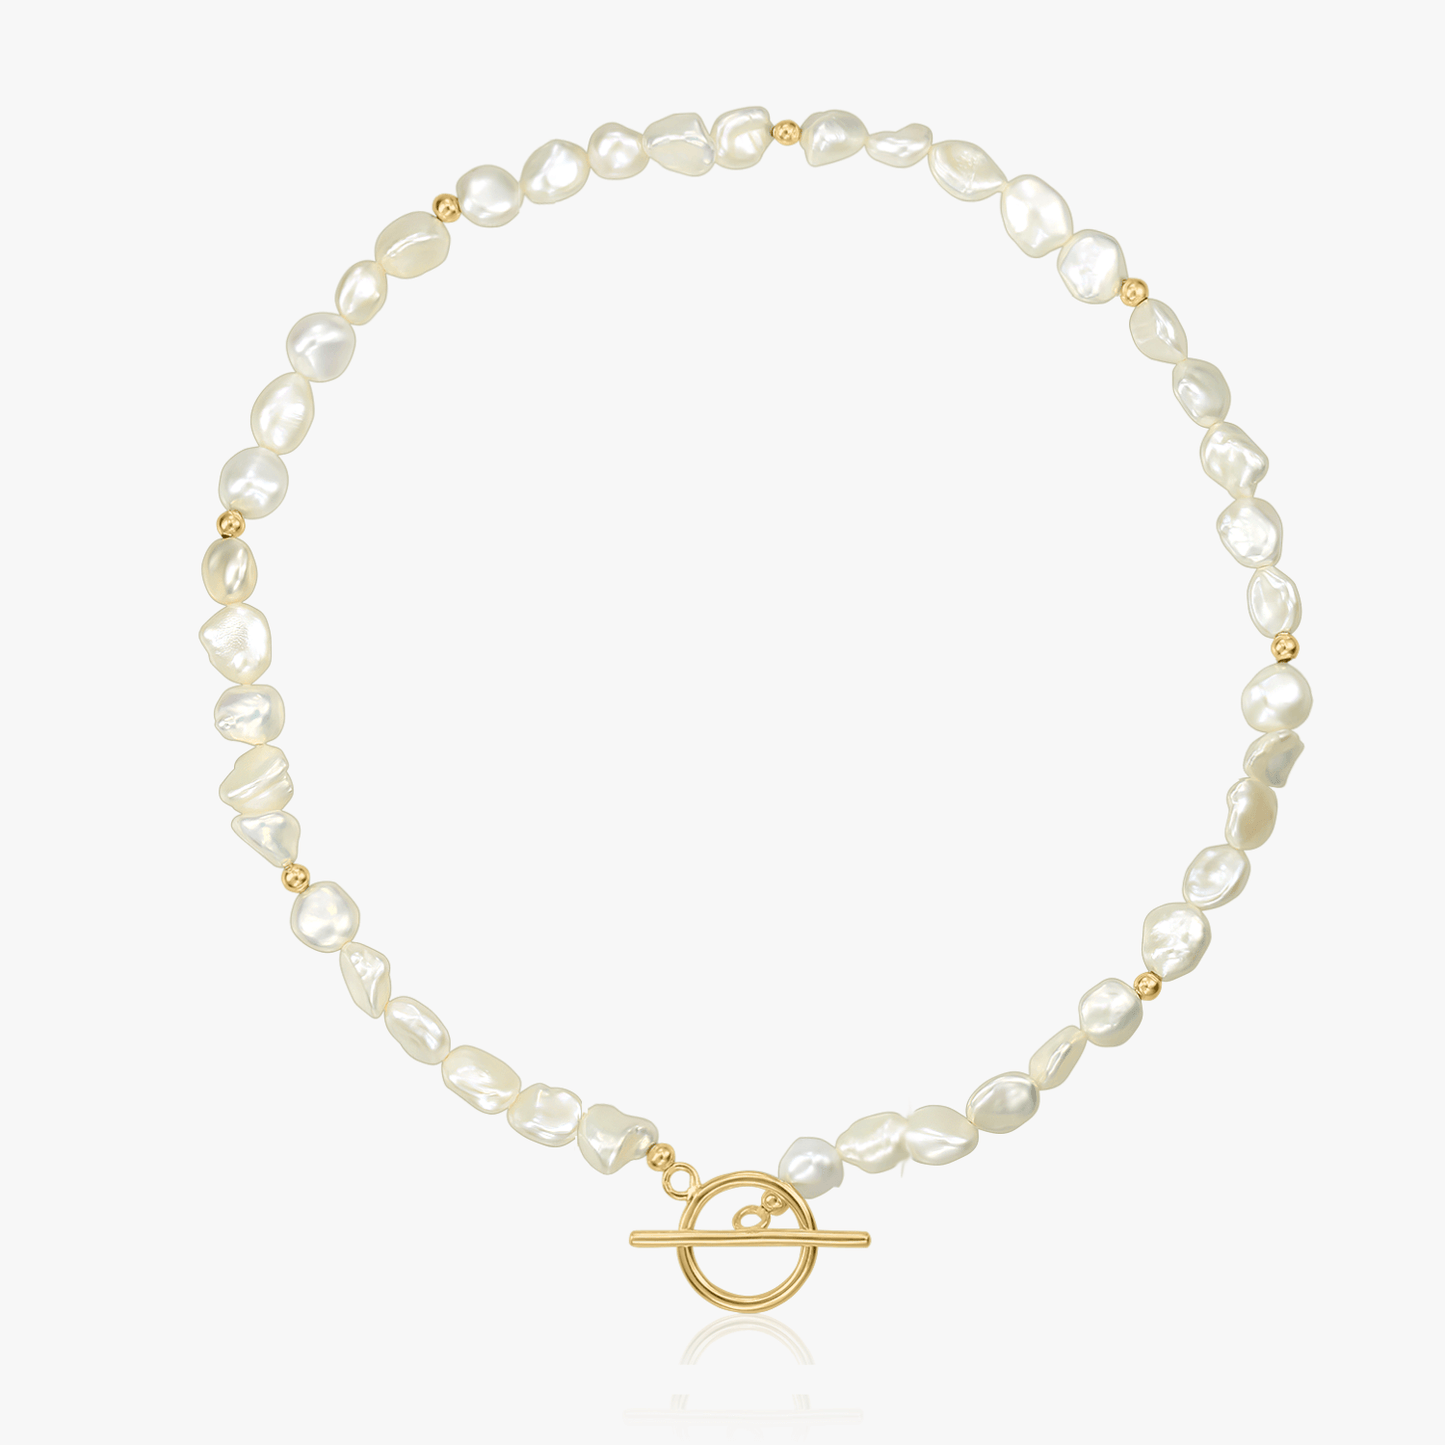 Golden Grace silver necklace - Natural Pearls